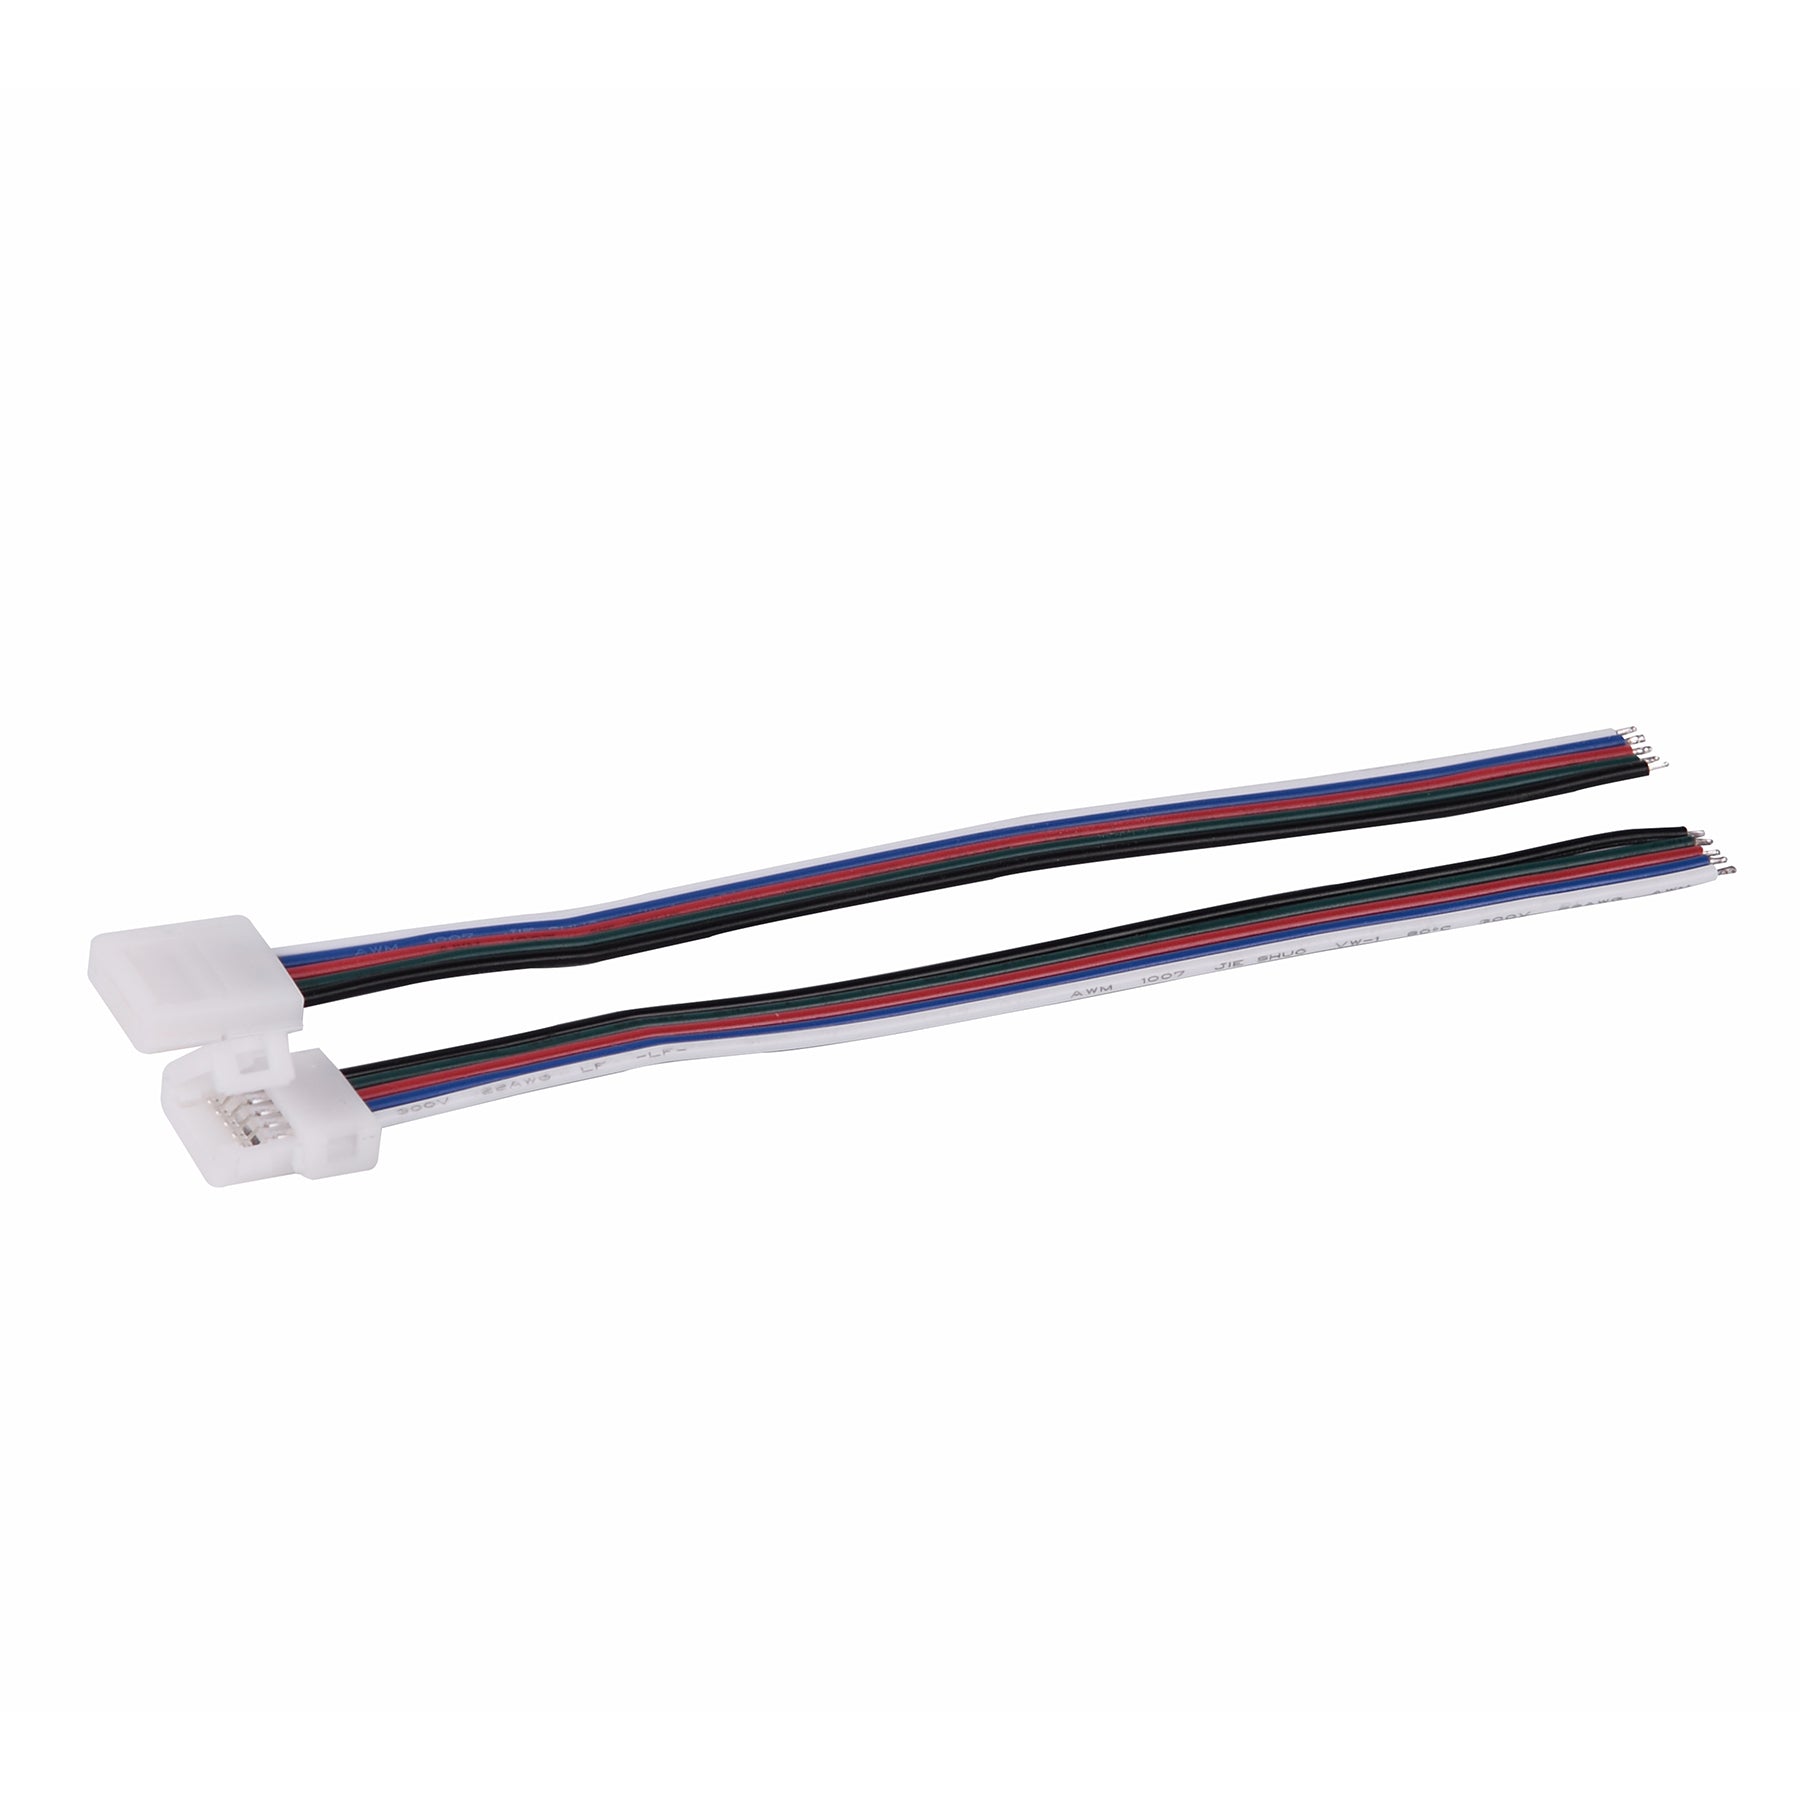 22awg-5-pin-10mm-width-pcb-rgbw-strip-to-wire